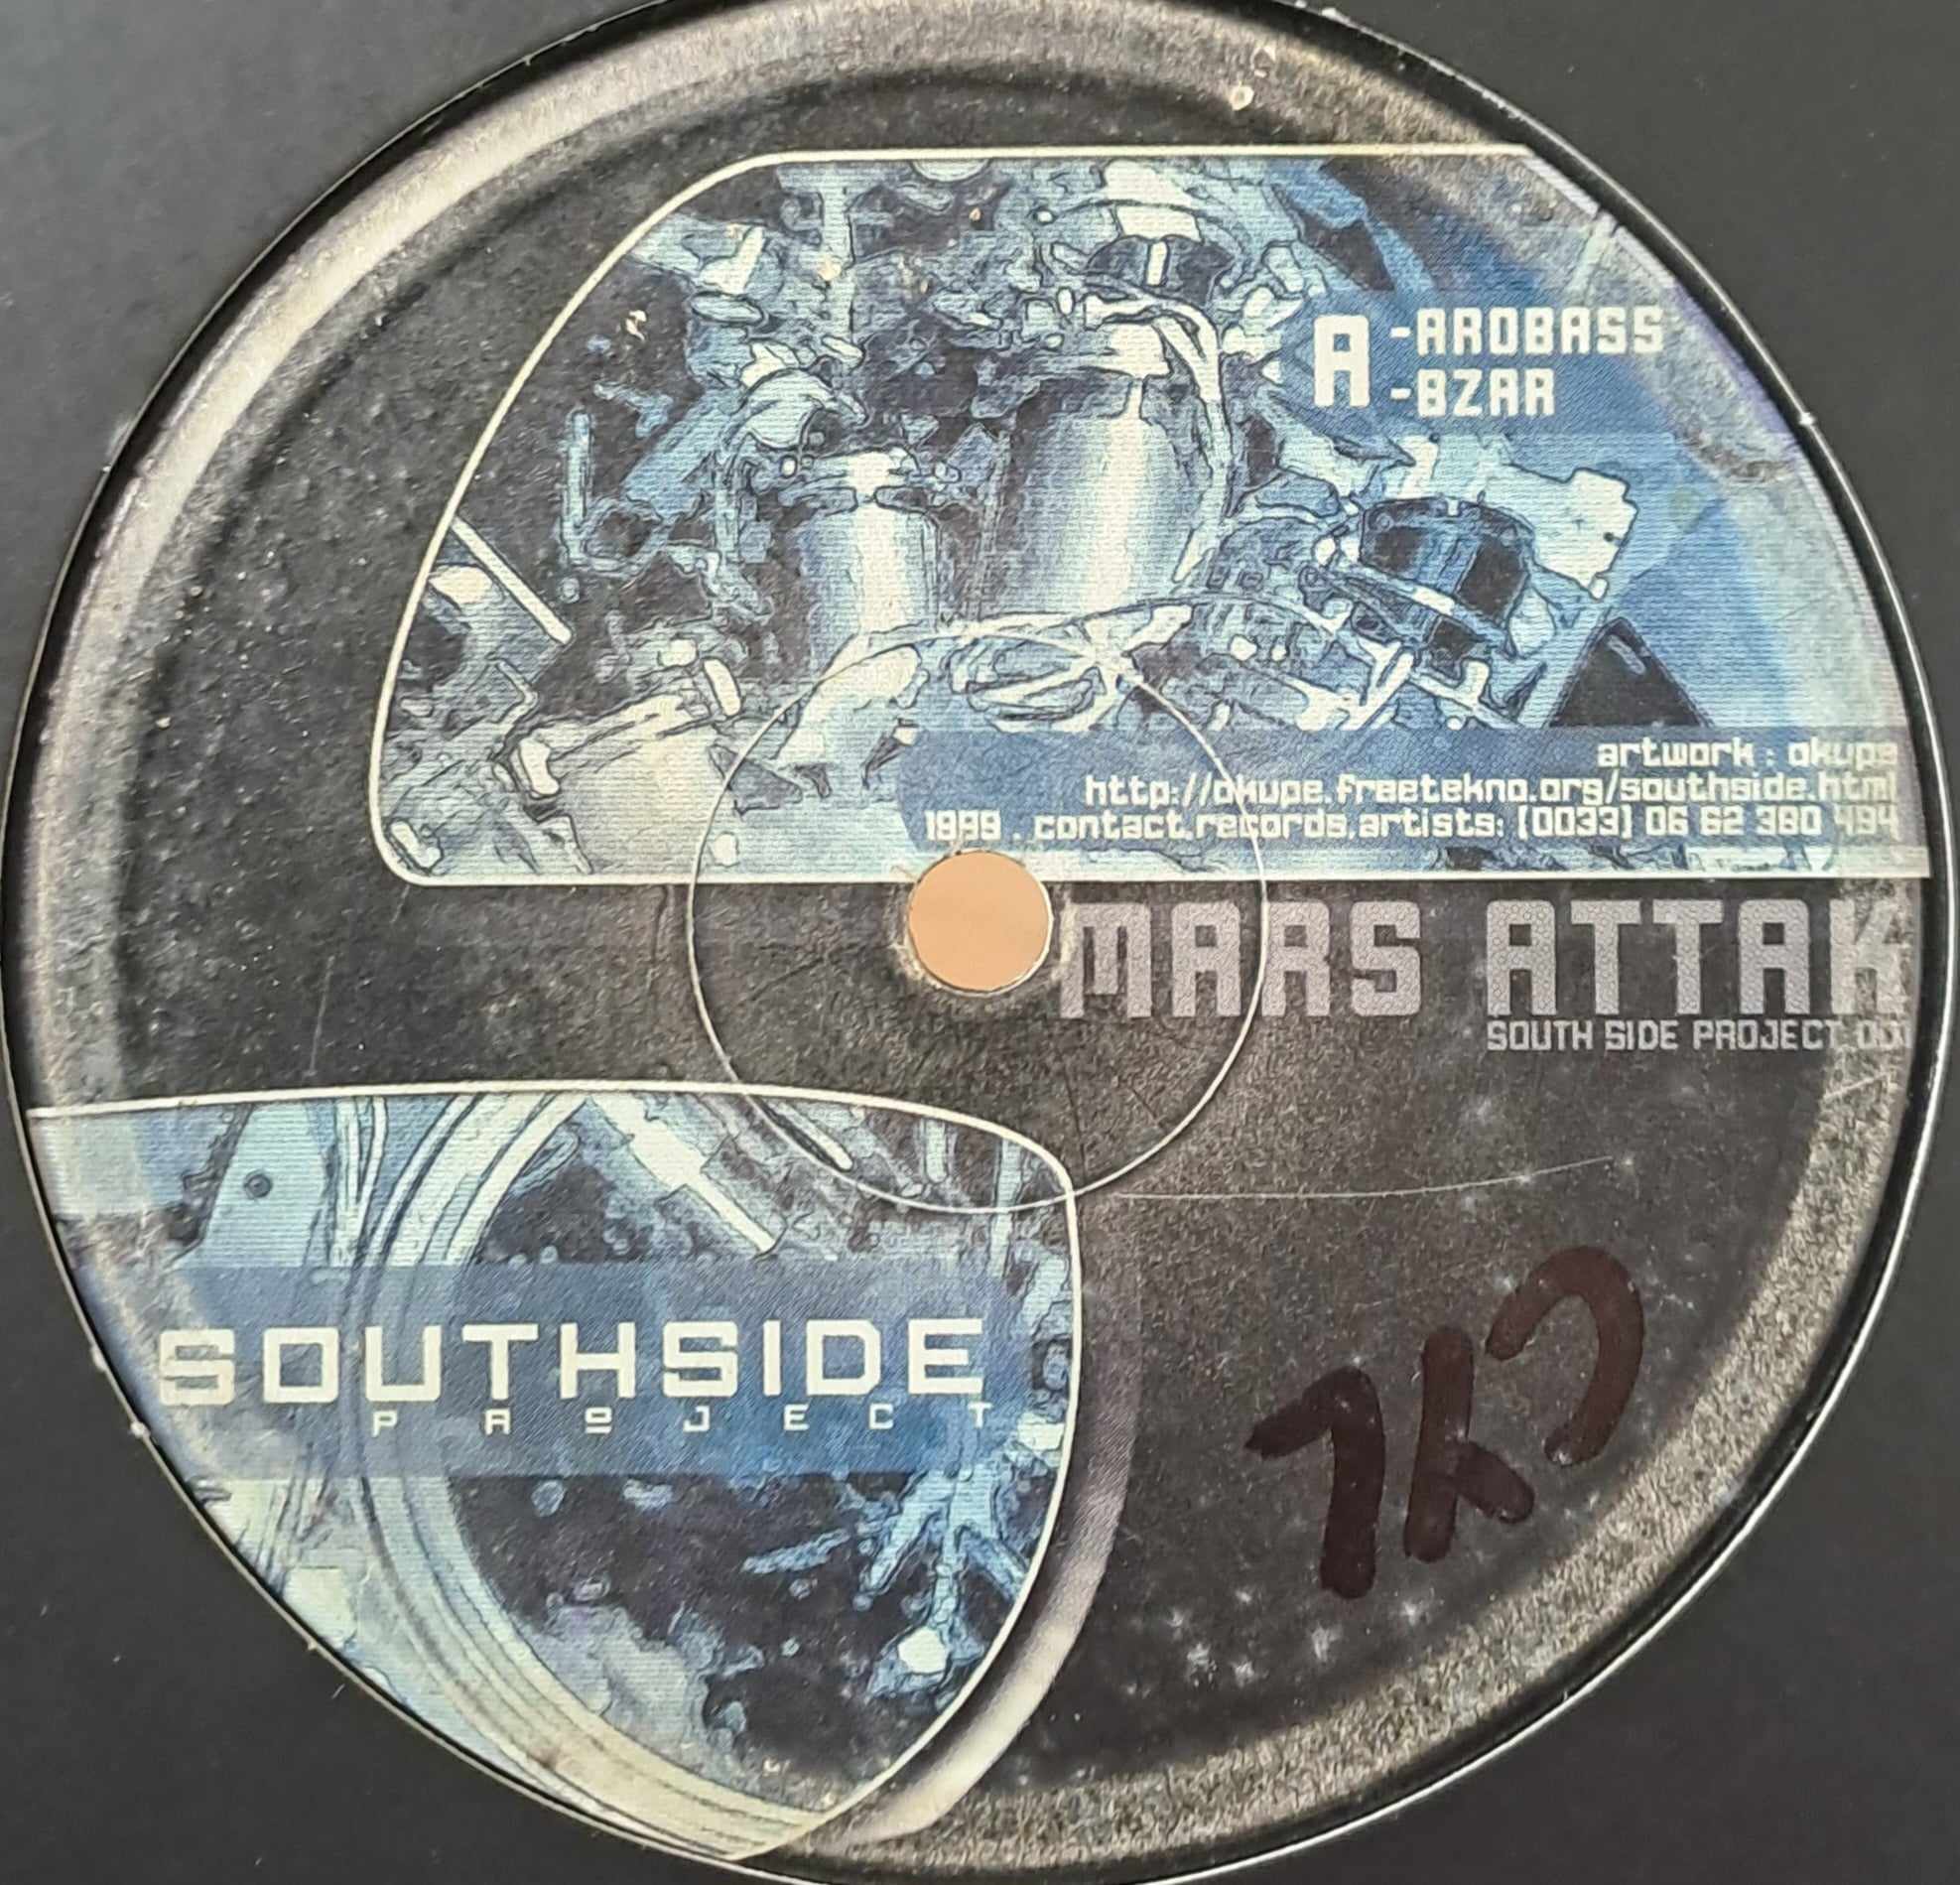 Mars Attak - South Side Project 001 - vinyle freetekno